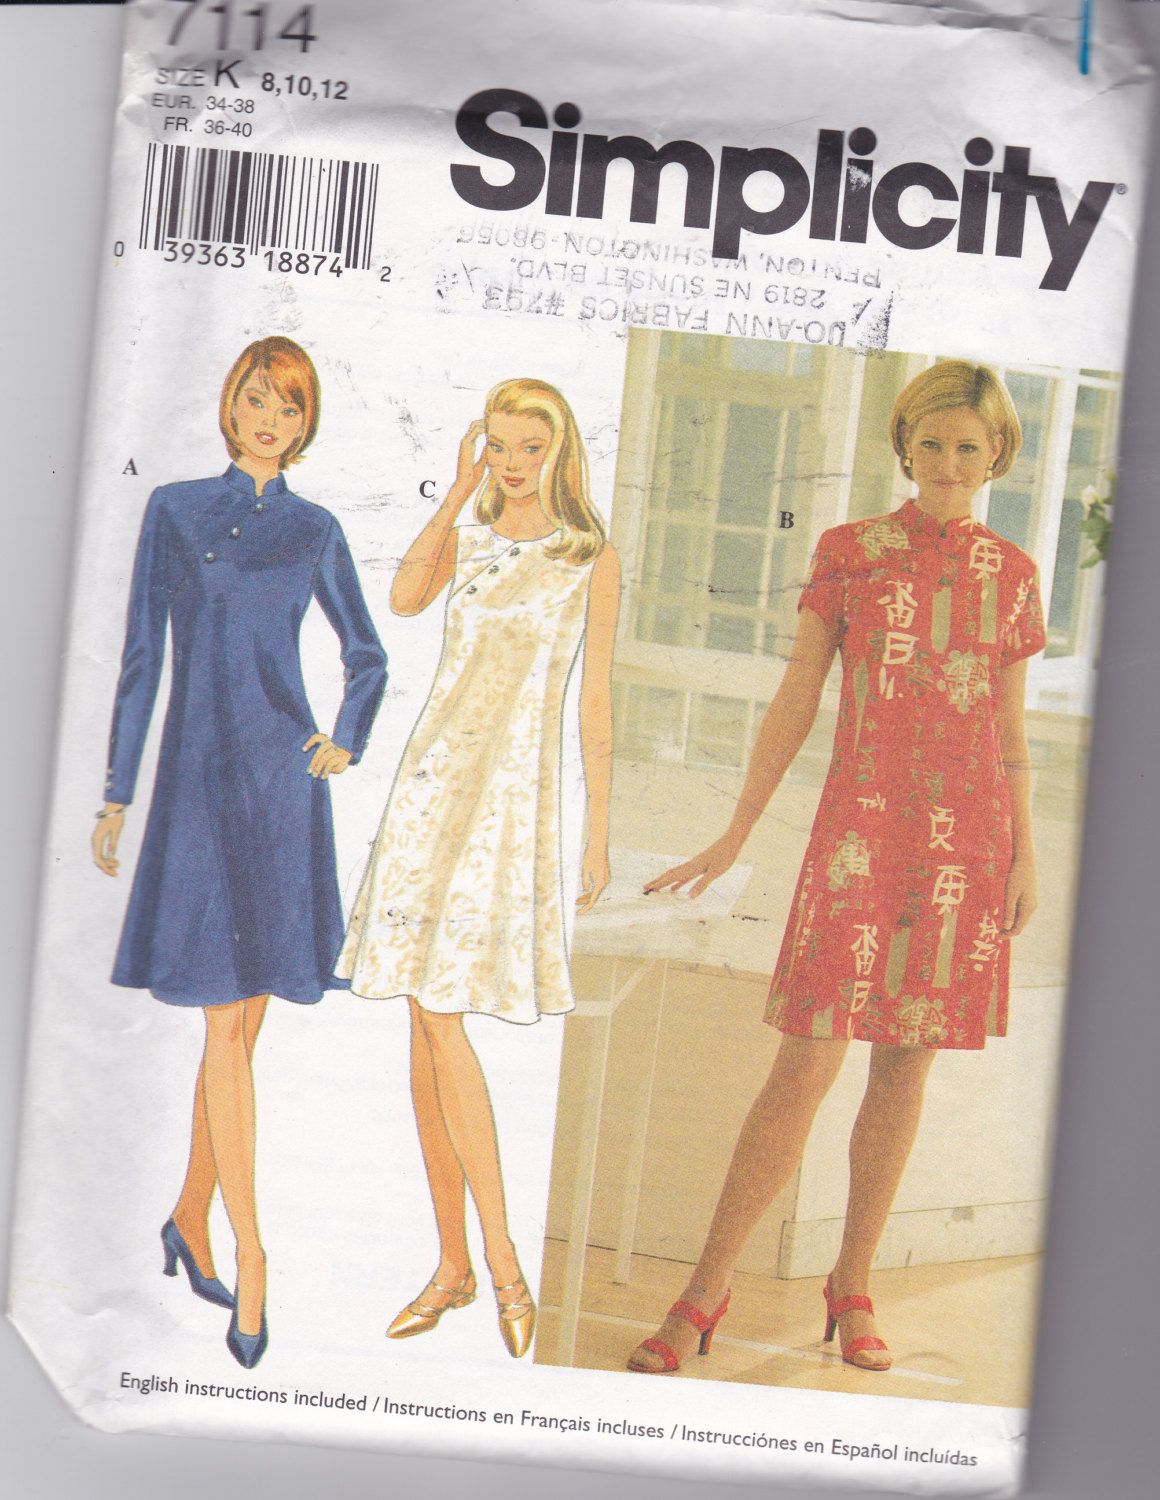 OOP New 1996 Simplicity Pattern 7114 Asian Style by Allaboutthecat